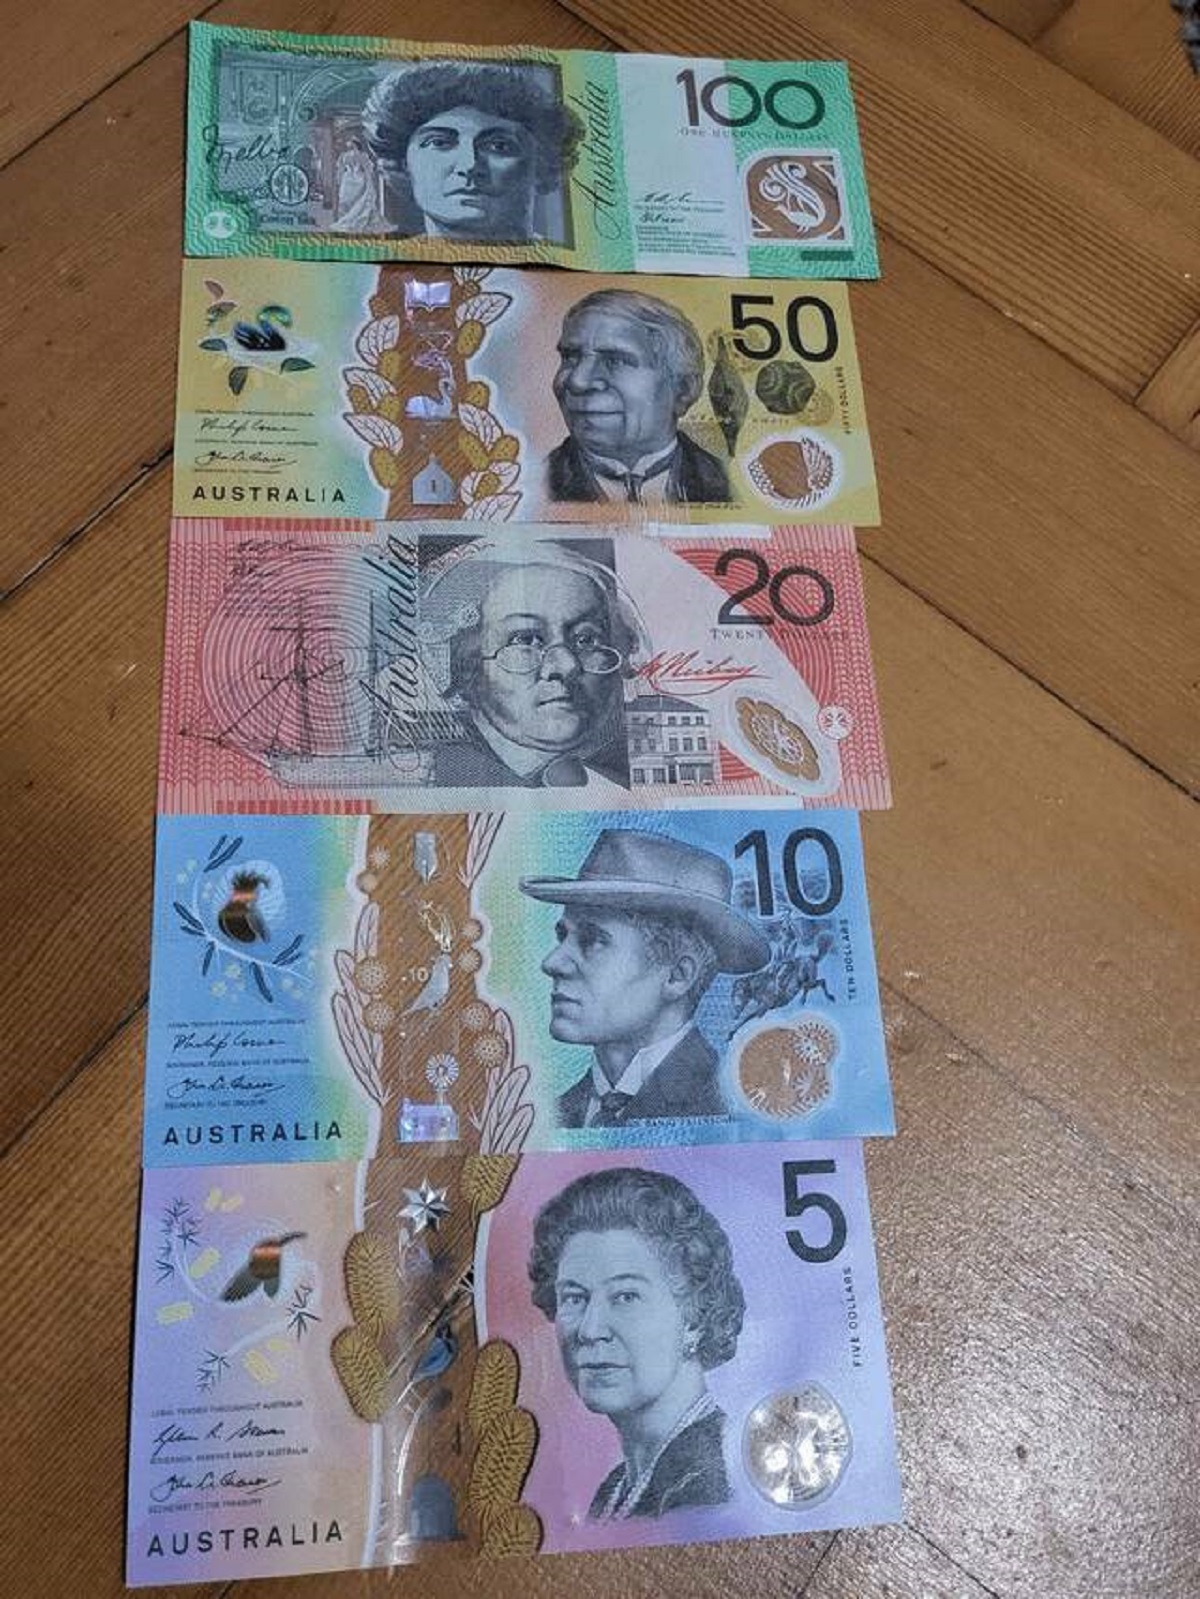 "Exchanged AUD and noticed the highernote sizes change based on their value"